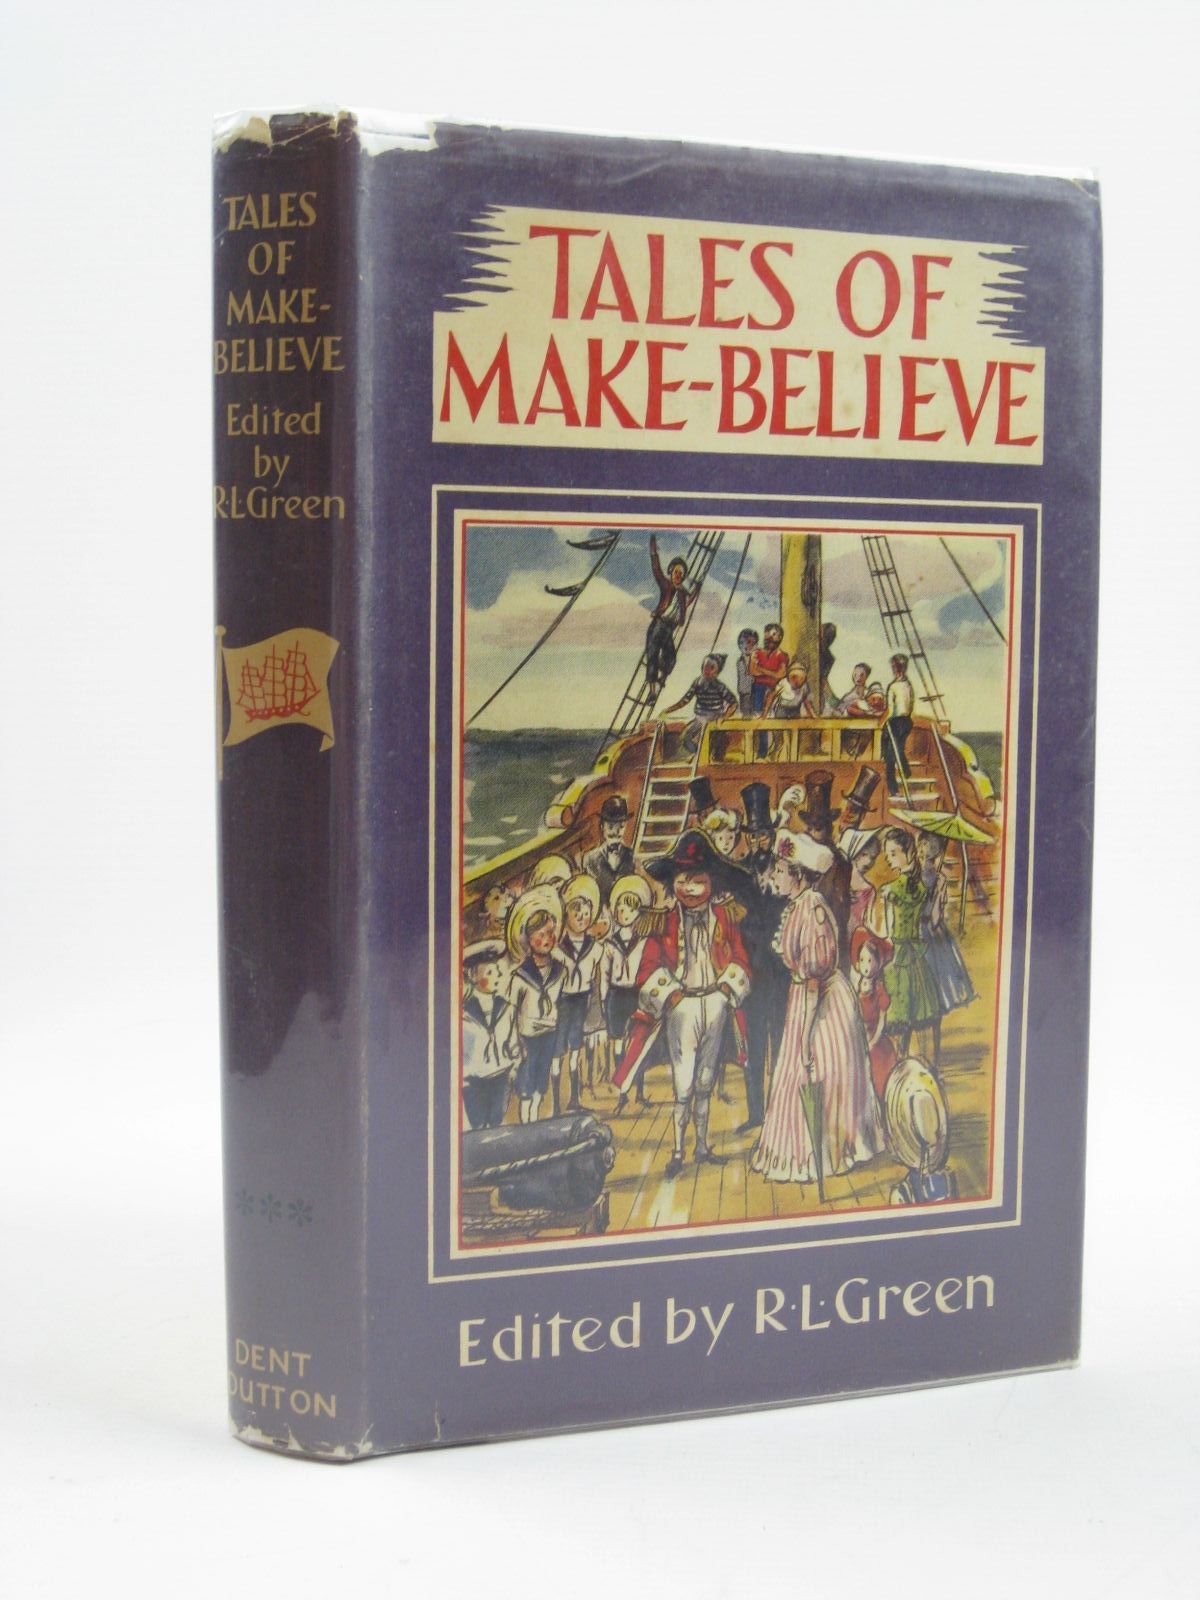 Cover of TALES OF MAKE-BELIEVE by Roger Lancelyn Green